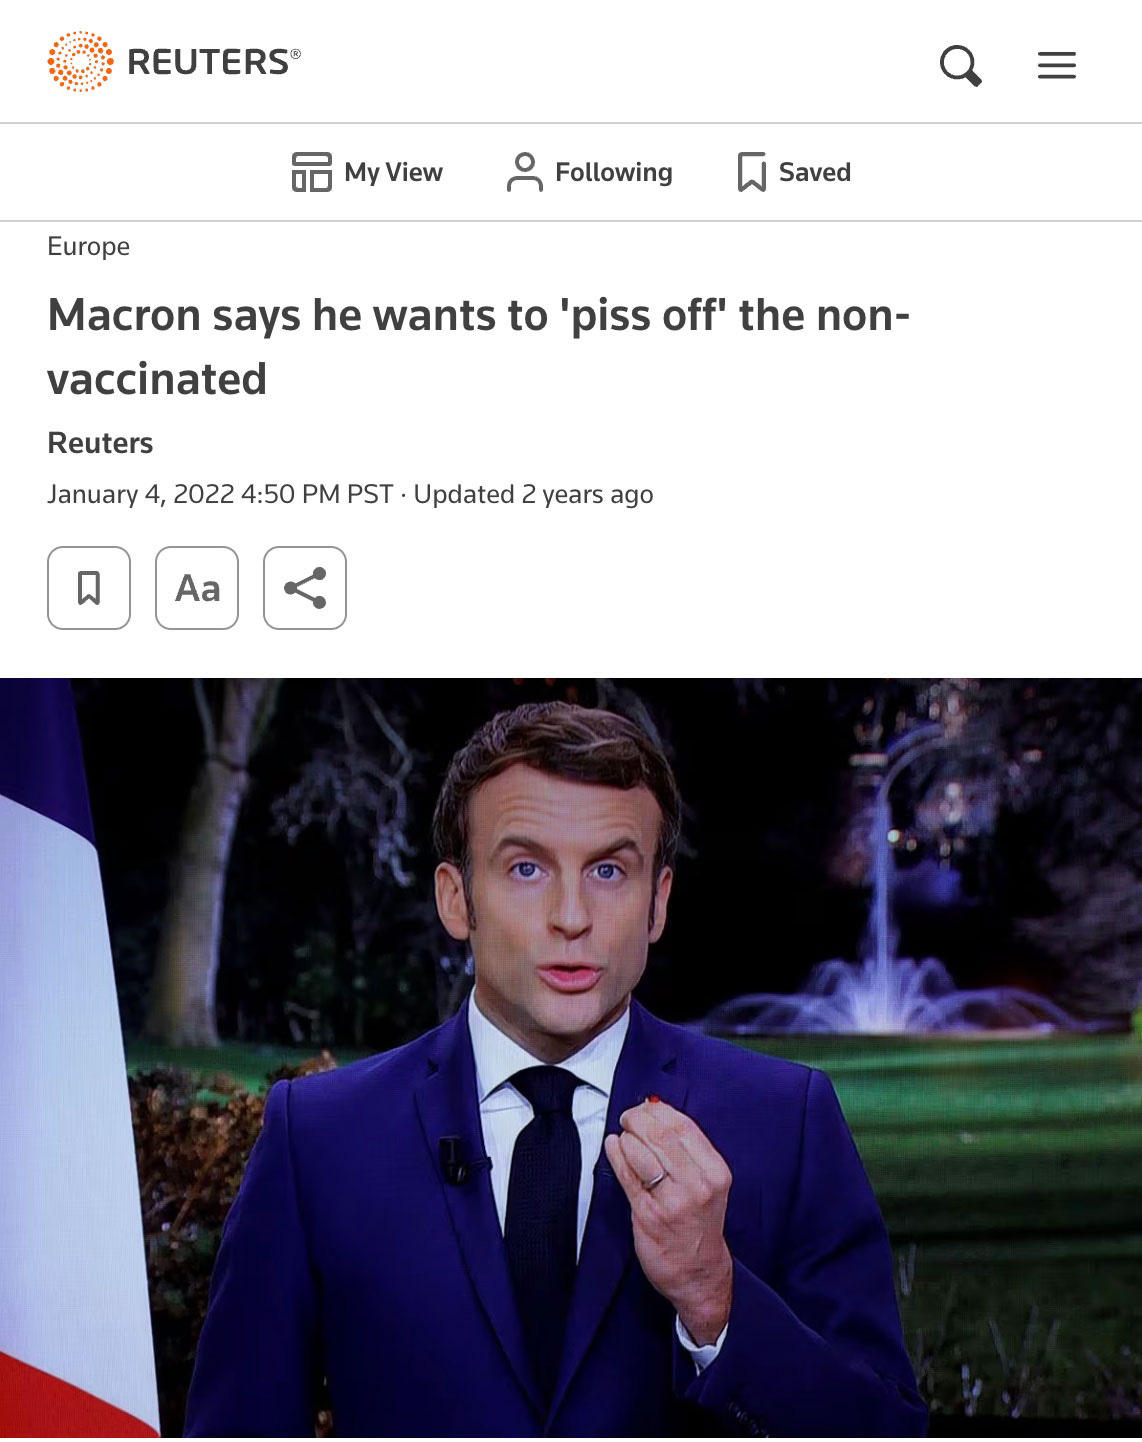 Reuters: Macron Says He Wants to Piss off the Non-Vaccinated